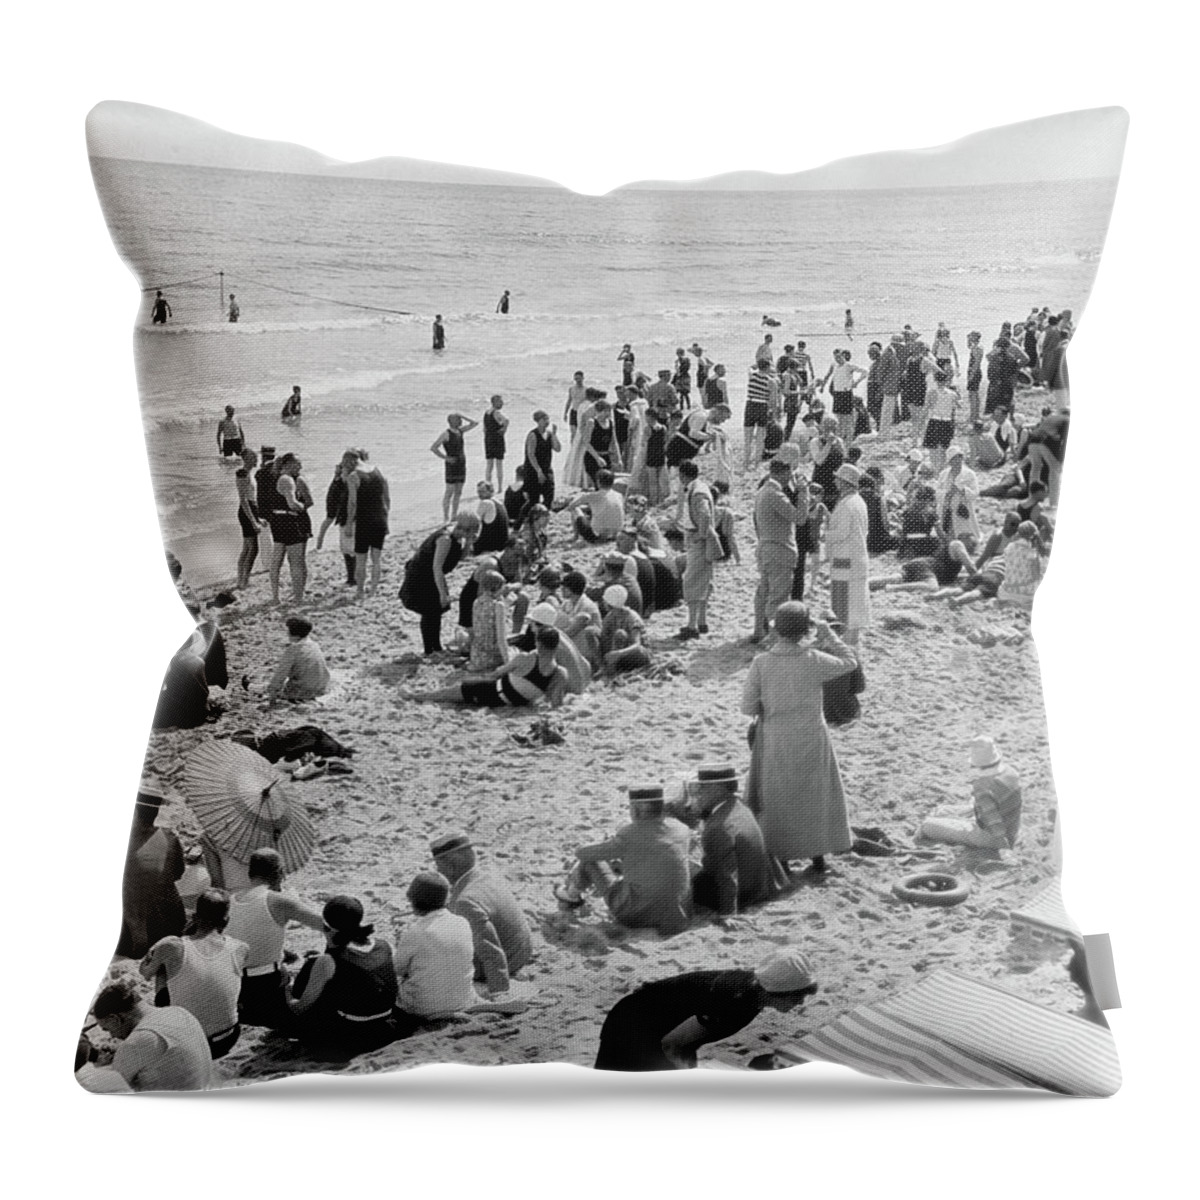 Photography Throw Pillow featuring the photograph 1920s Crowd Of People Some Fully by Vintage Images